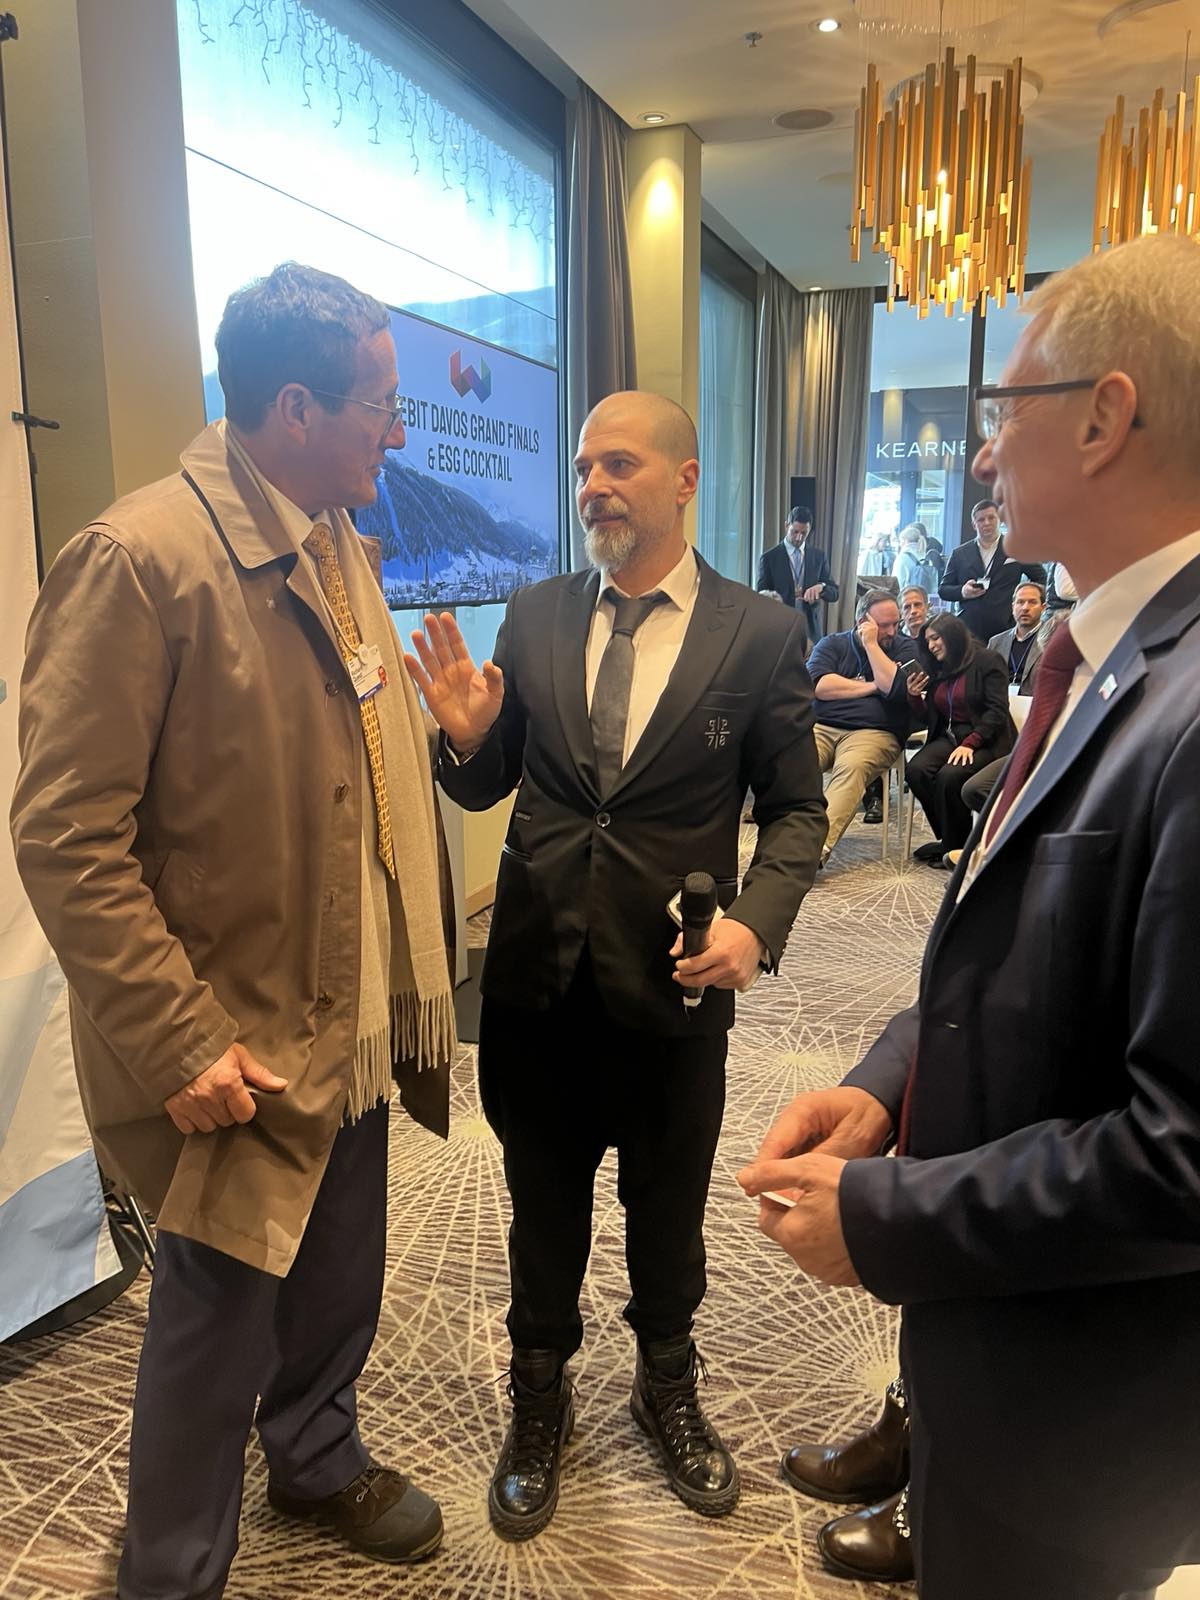 Plamen Russev with Richard Quest of CNN and the Prime Minister of Bulgaria acad. Nikolai Denkov at the Grand Finals of Founders Games in Davos